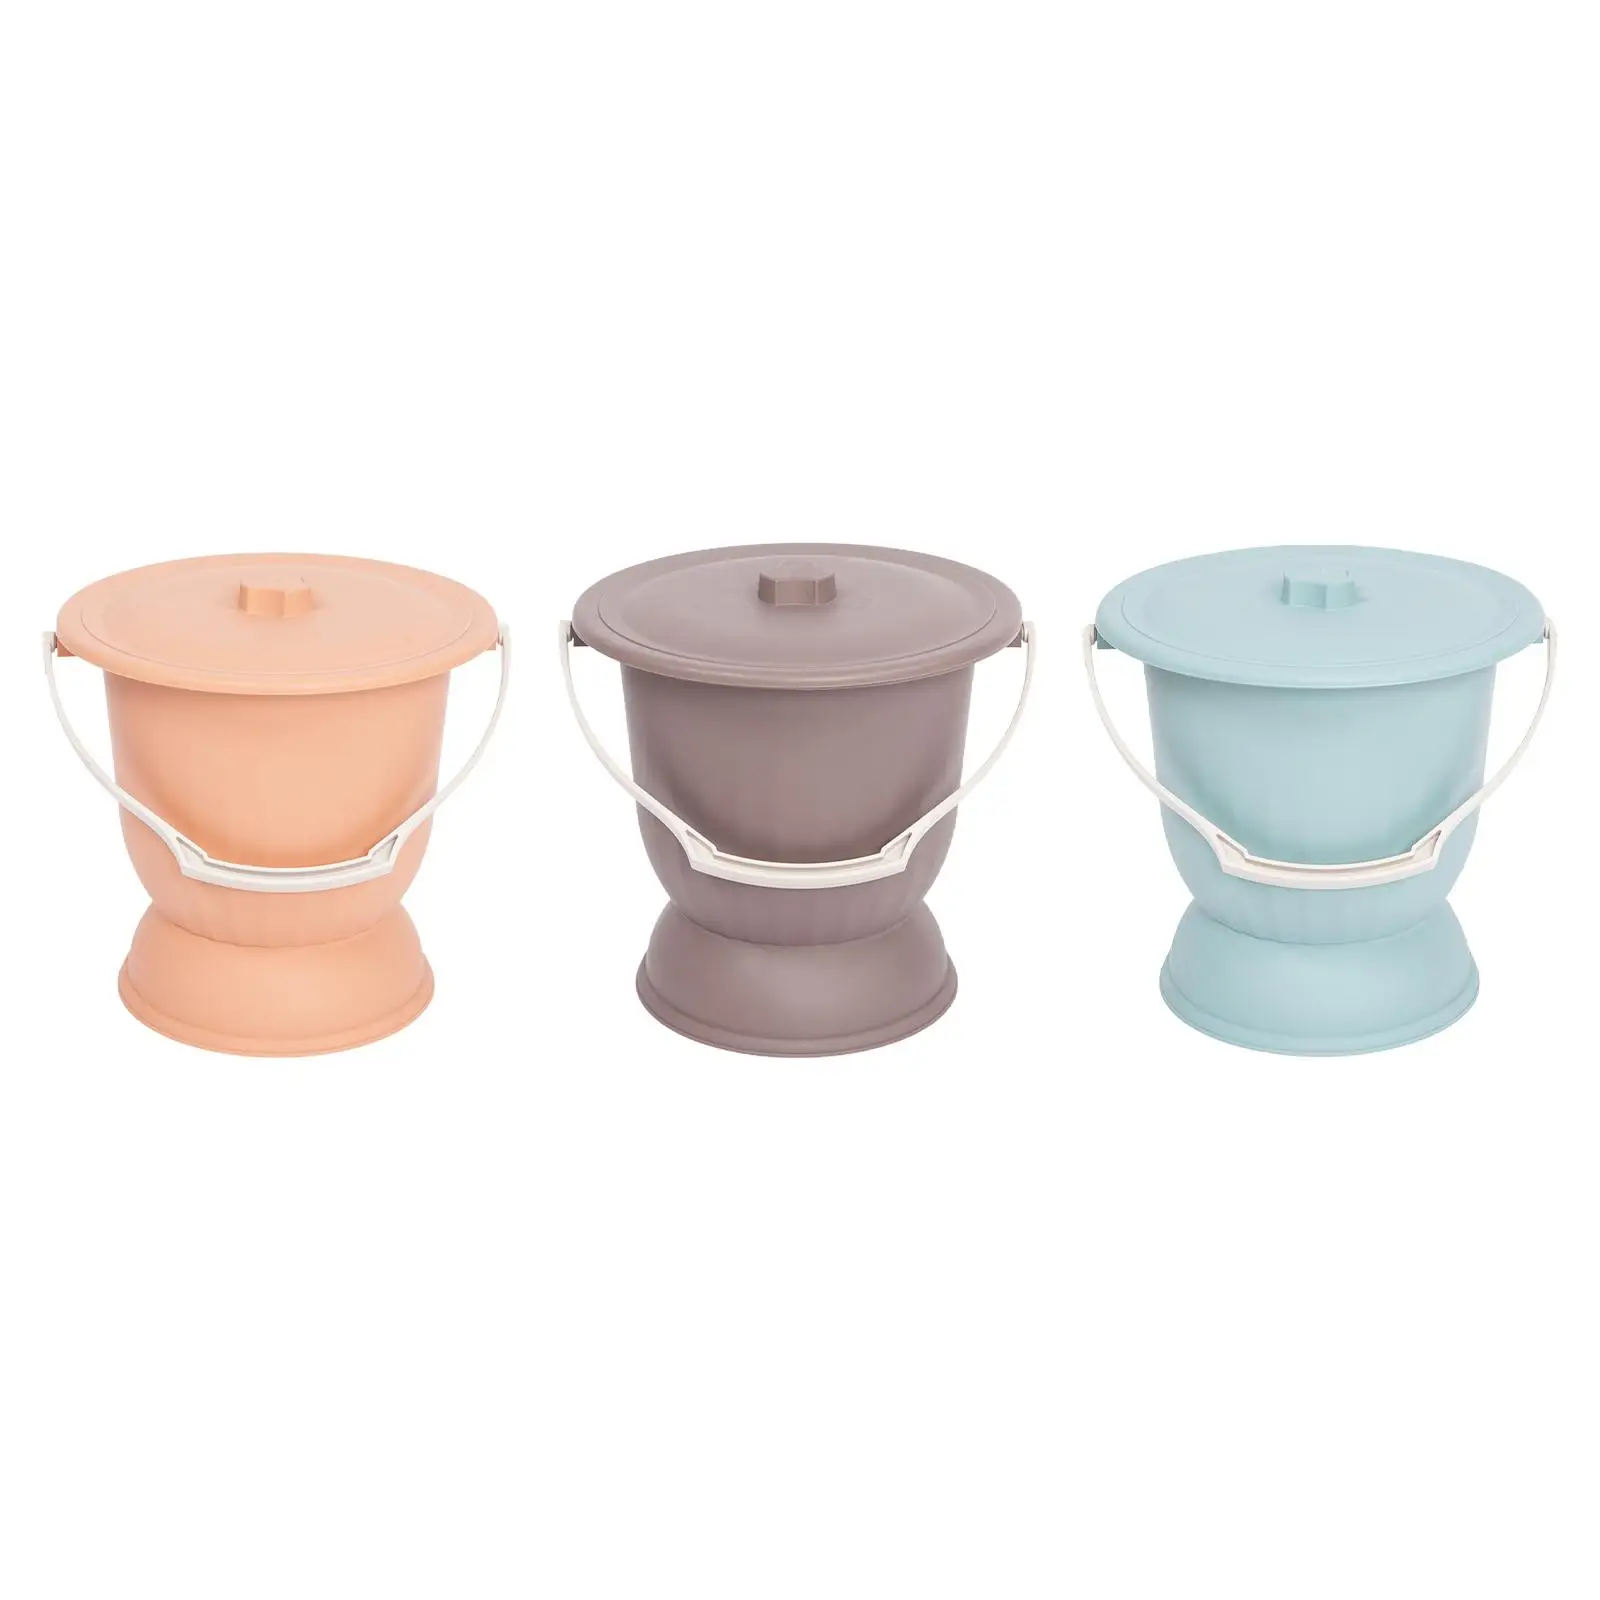 Household Spittoon with Lid and Handle Pot Bedside Commode Bucket Portable Toilet for elder Adults Woman